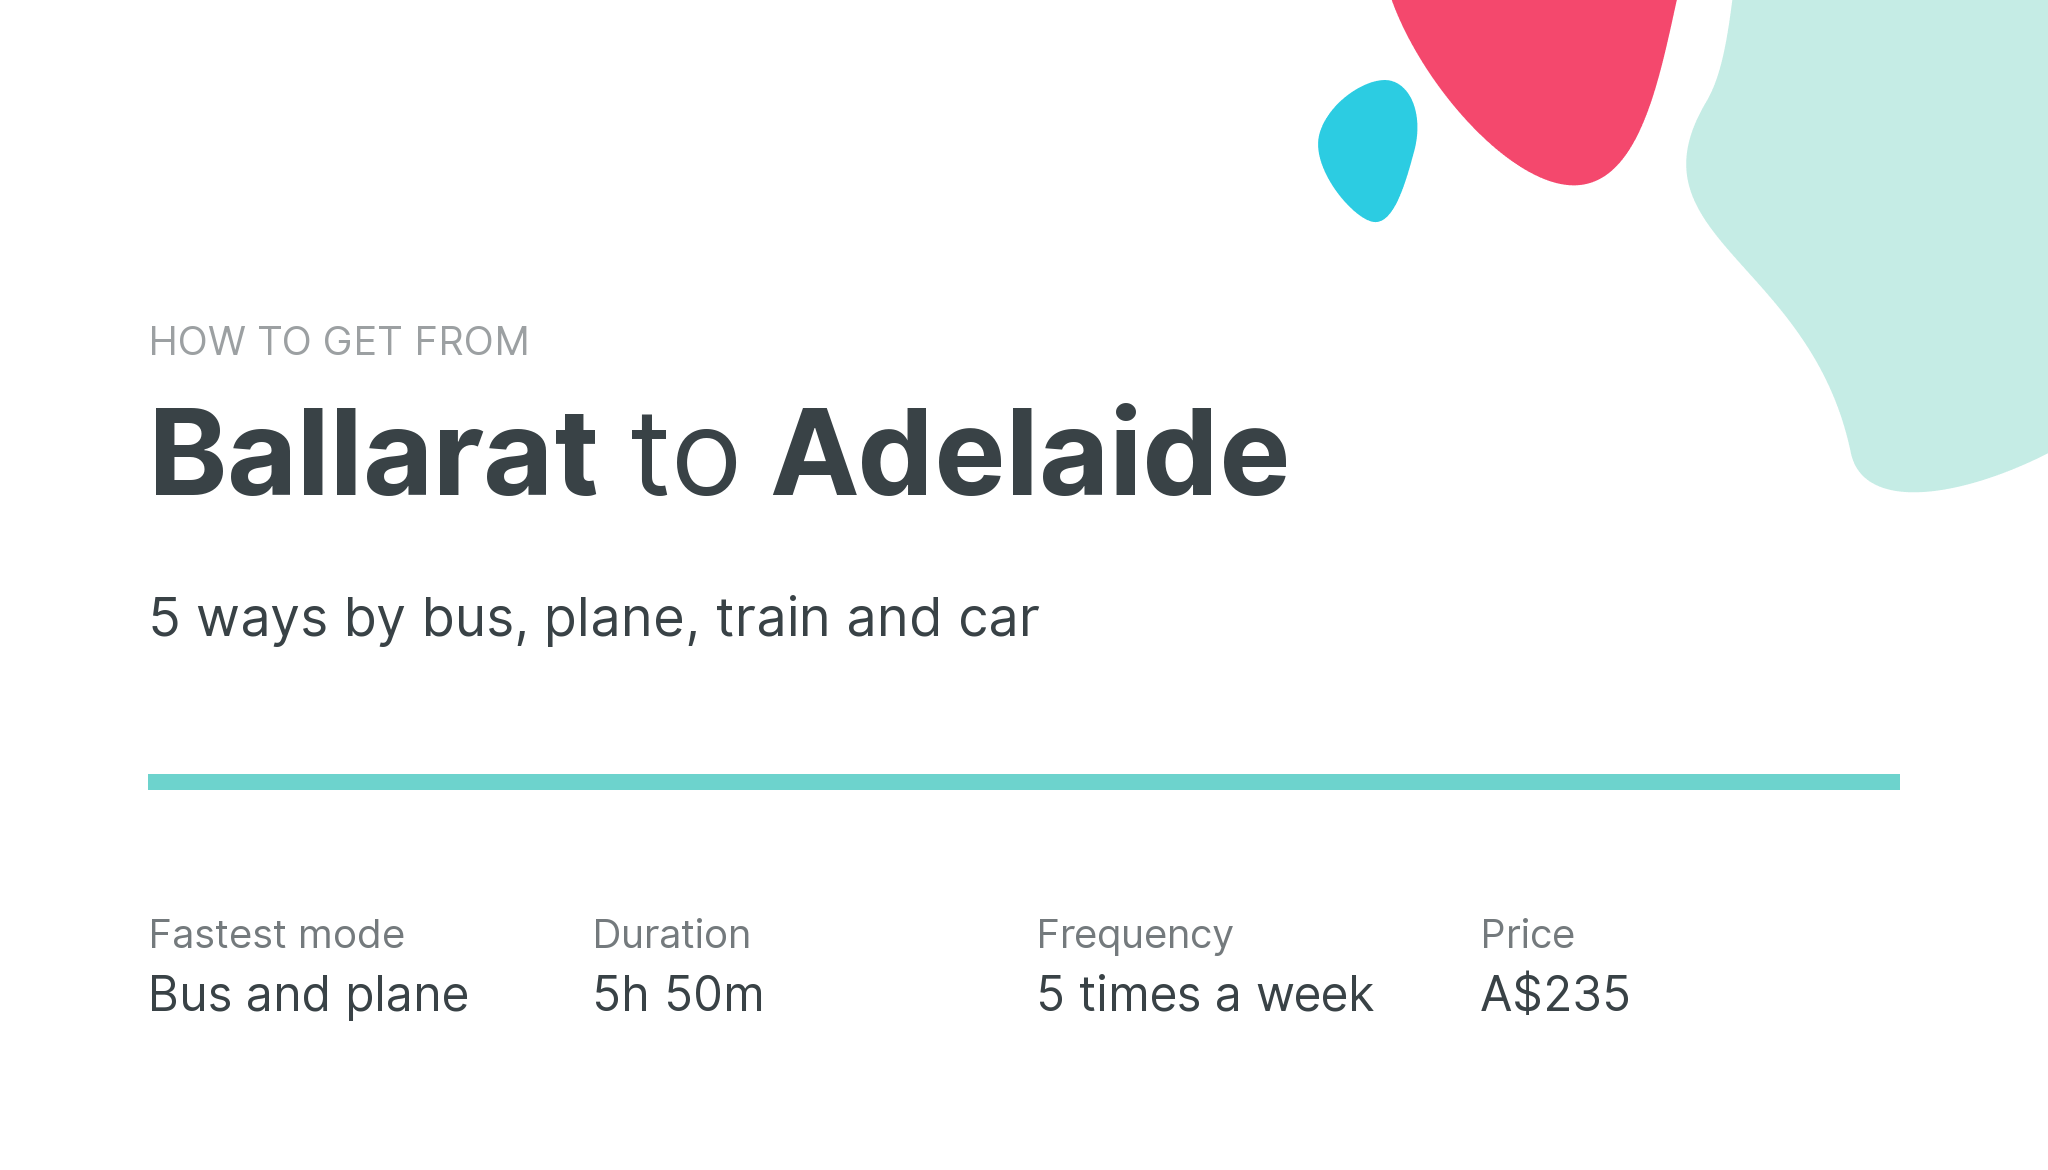 How do I get from Ballarat to Adelaide